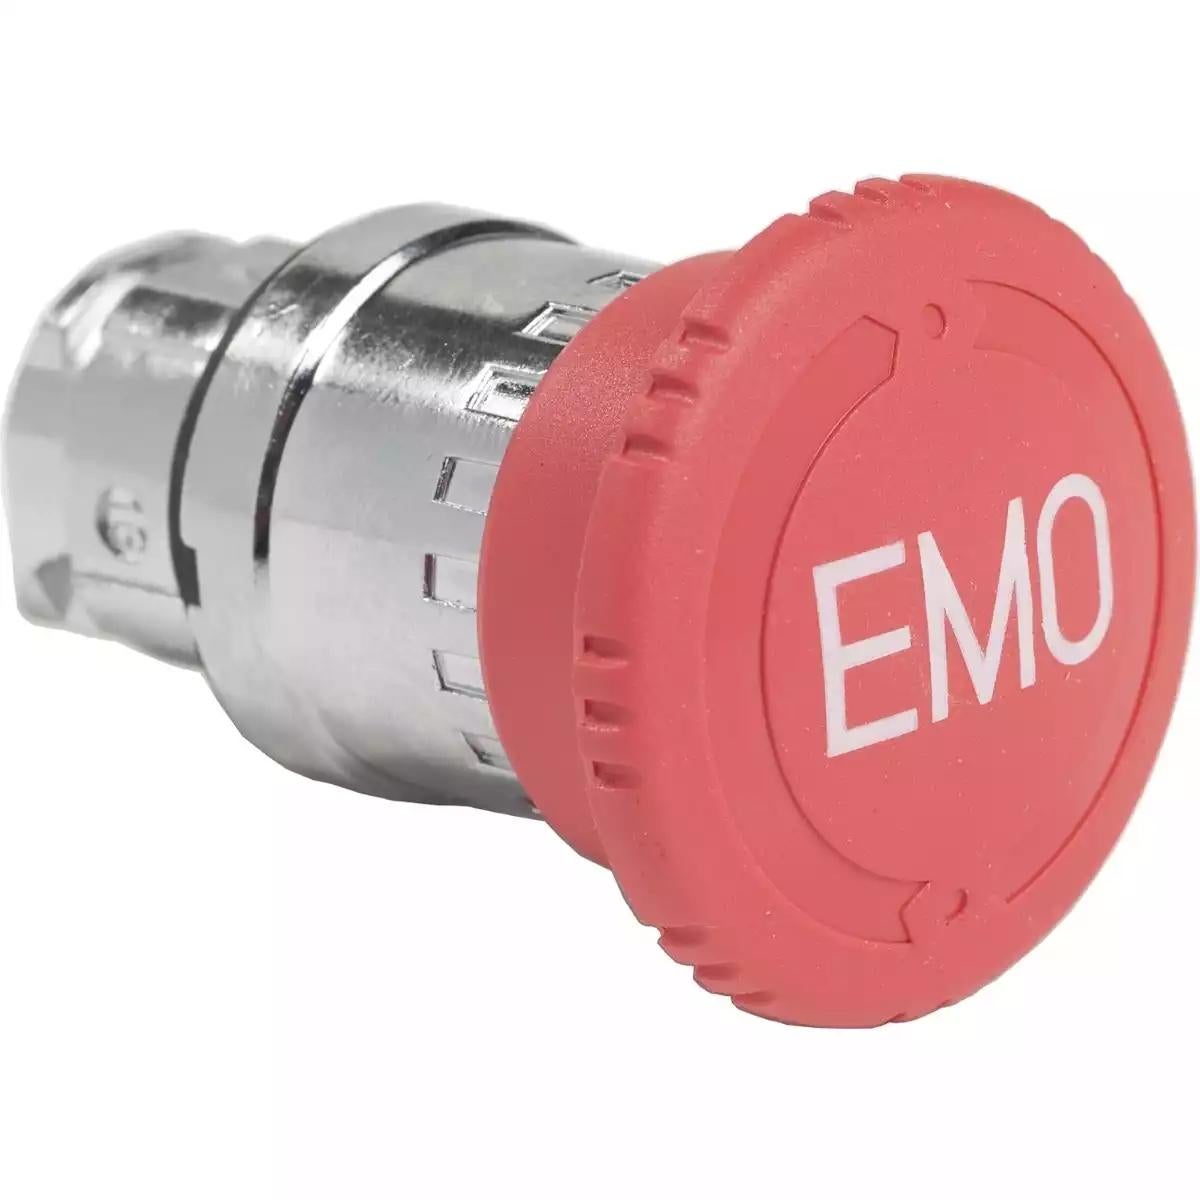 Harmony XB4, Emergency stop head, switching off, metal, red mushroom Ø40, Ø22, trigger latching turn to release, marked EMO